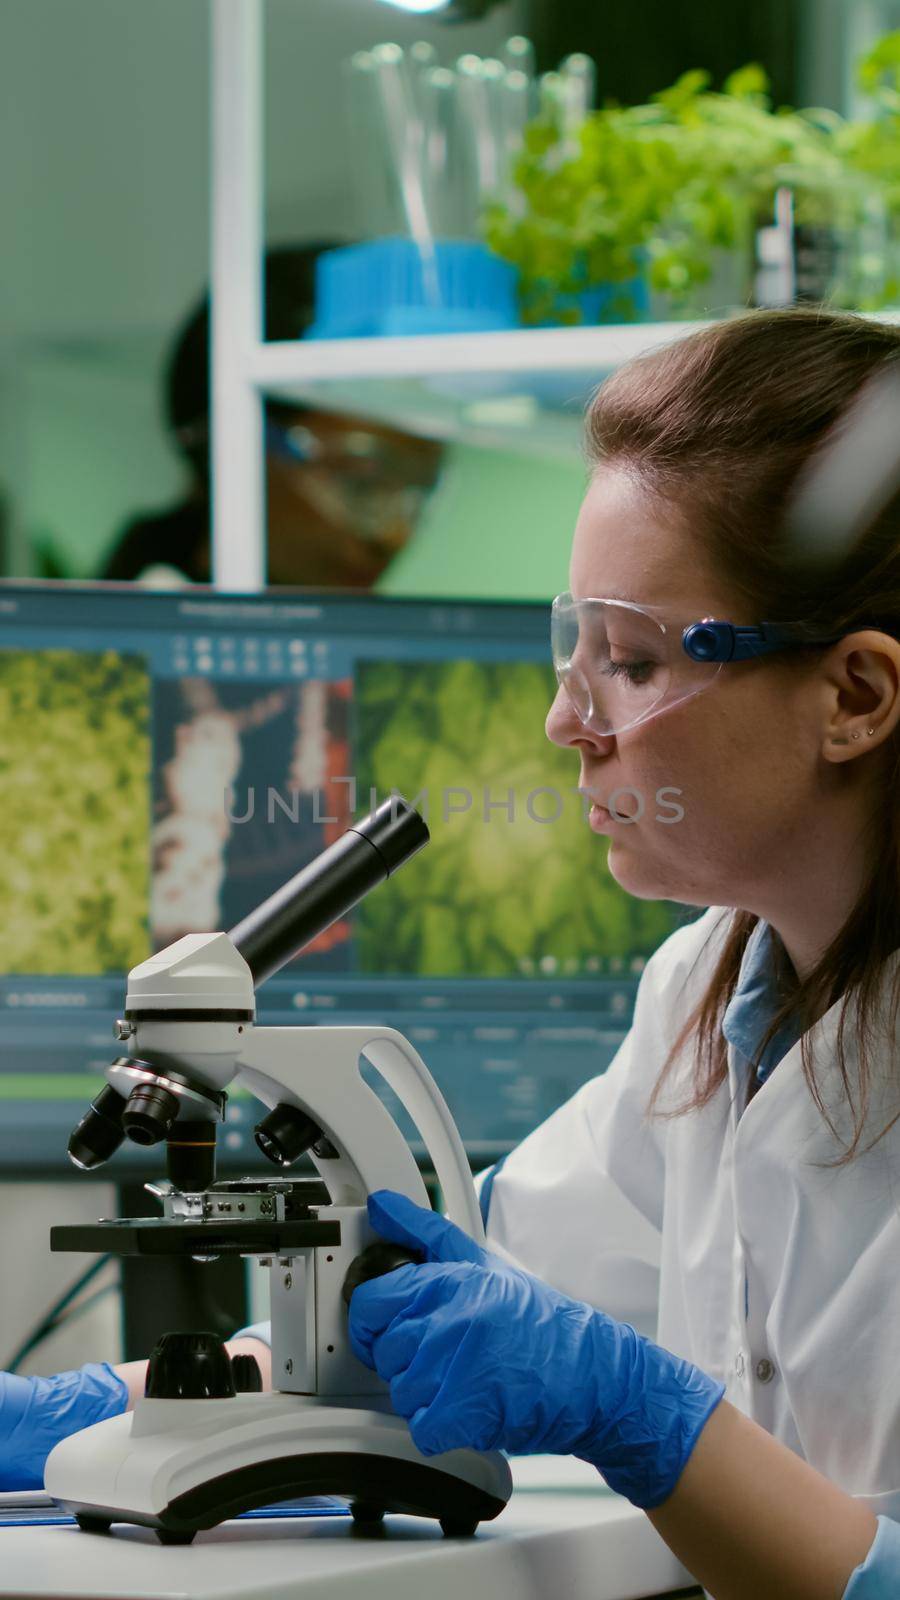 Pharmaceutical scientist looking at green leaf sample on microscope while writing genetic test on notepad. Biologist specialist analyzing organic gmo plants while working in microbiology food laboratory